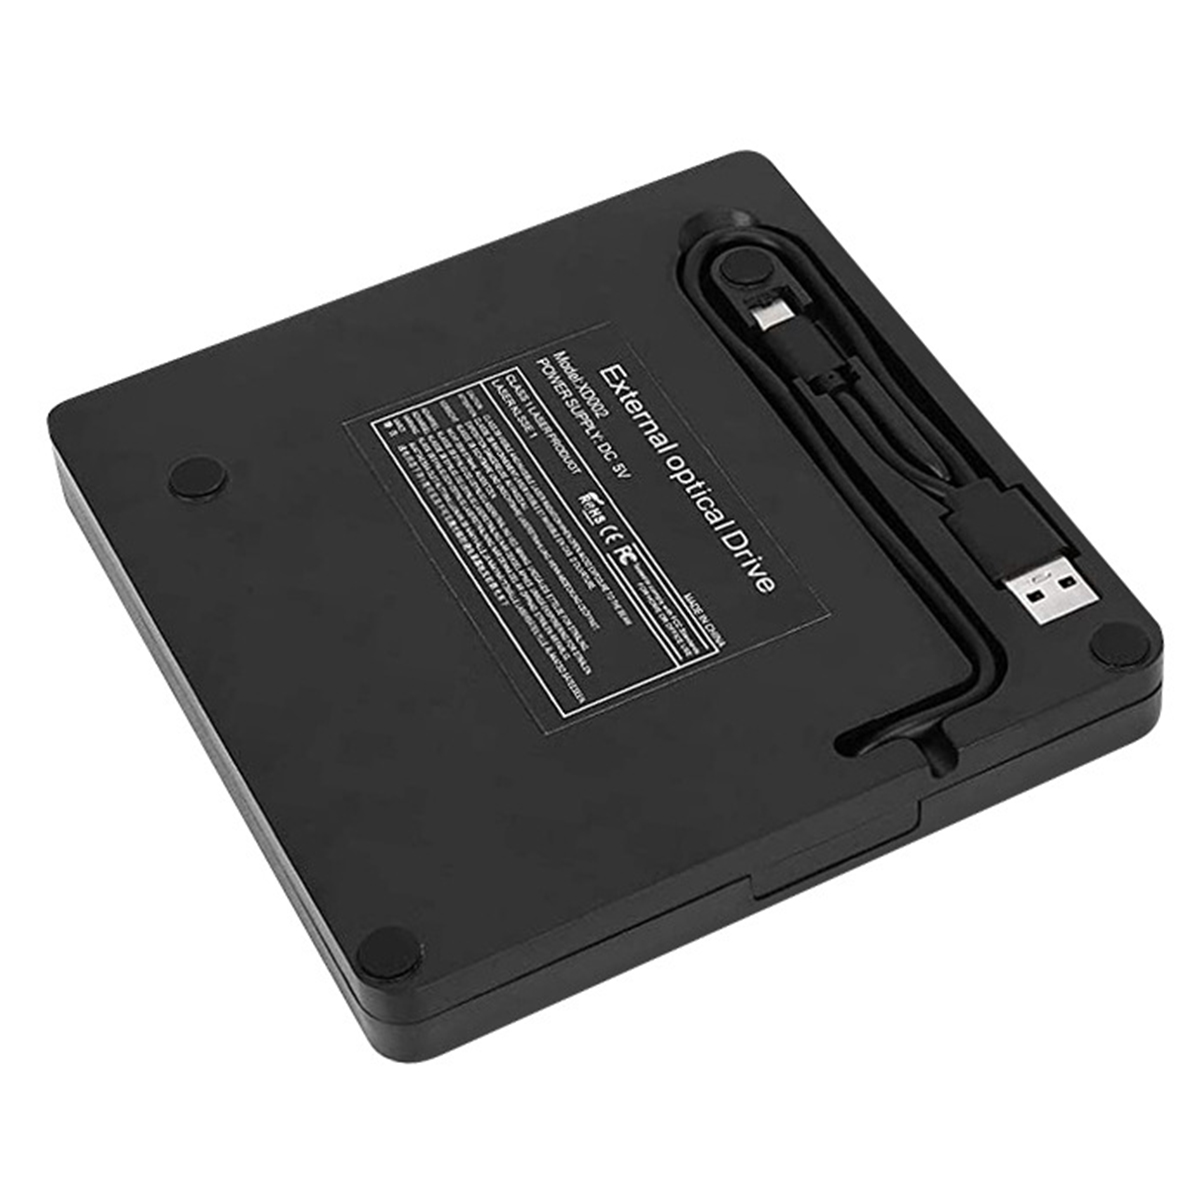 Find USB3.0 Type-C External CD DVD Optical Drive High Speed Data Transfer External DVD-RW Player External Burner Writer Rewriter for Computer PC Laptop XD0065 for Sale on Gipsybee.com with cryptocurrencies